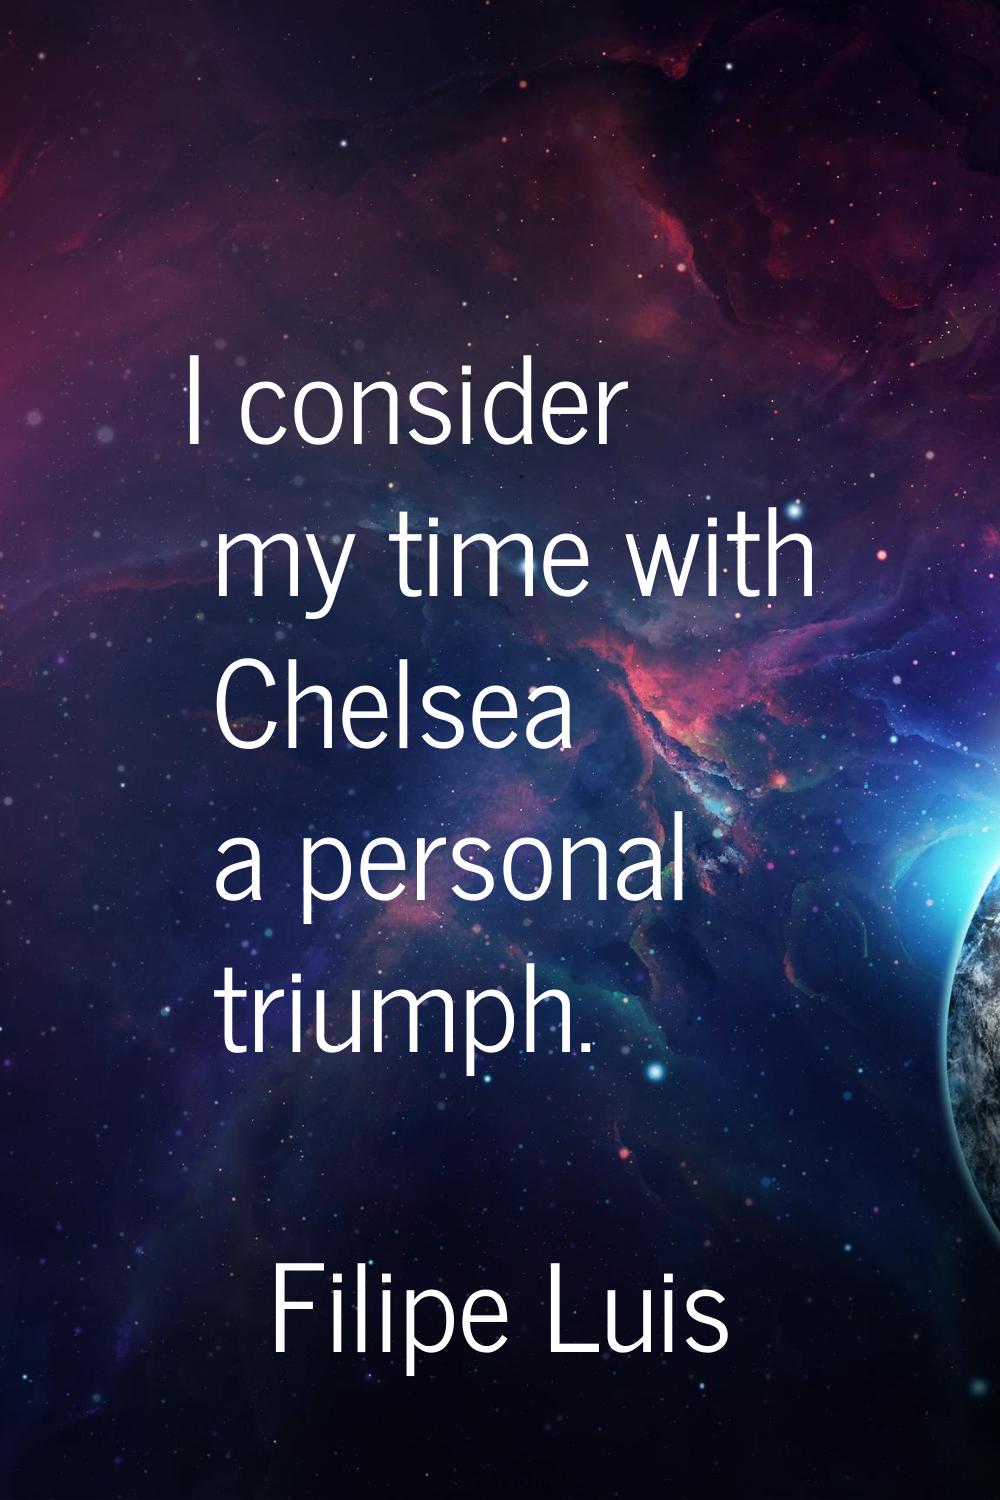 I consider my time with Chelsea a personal triumph.